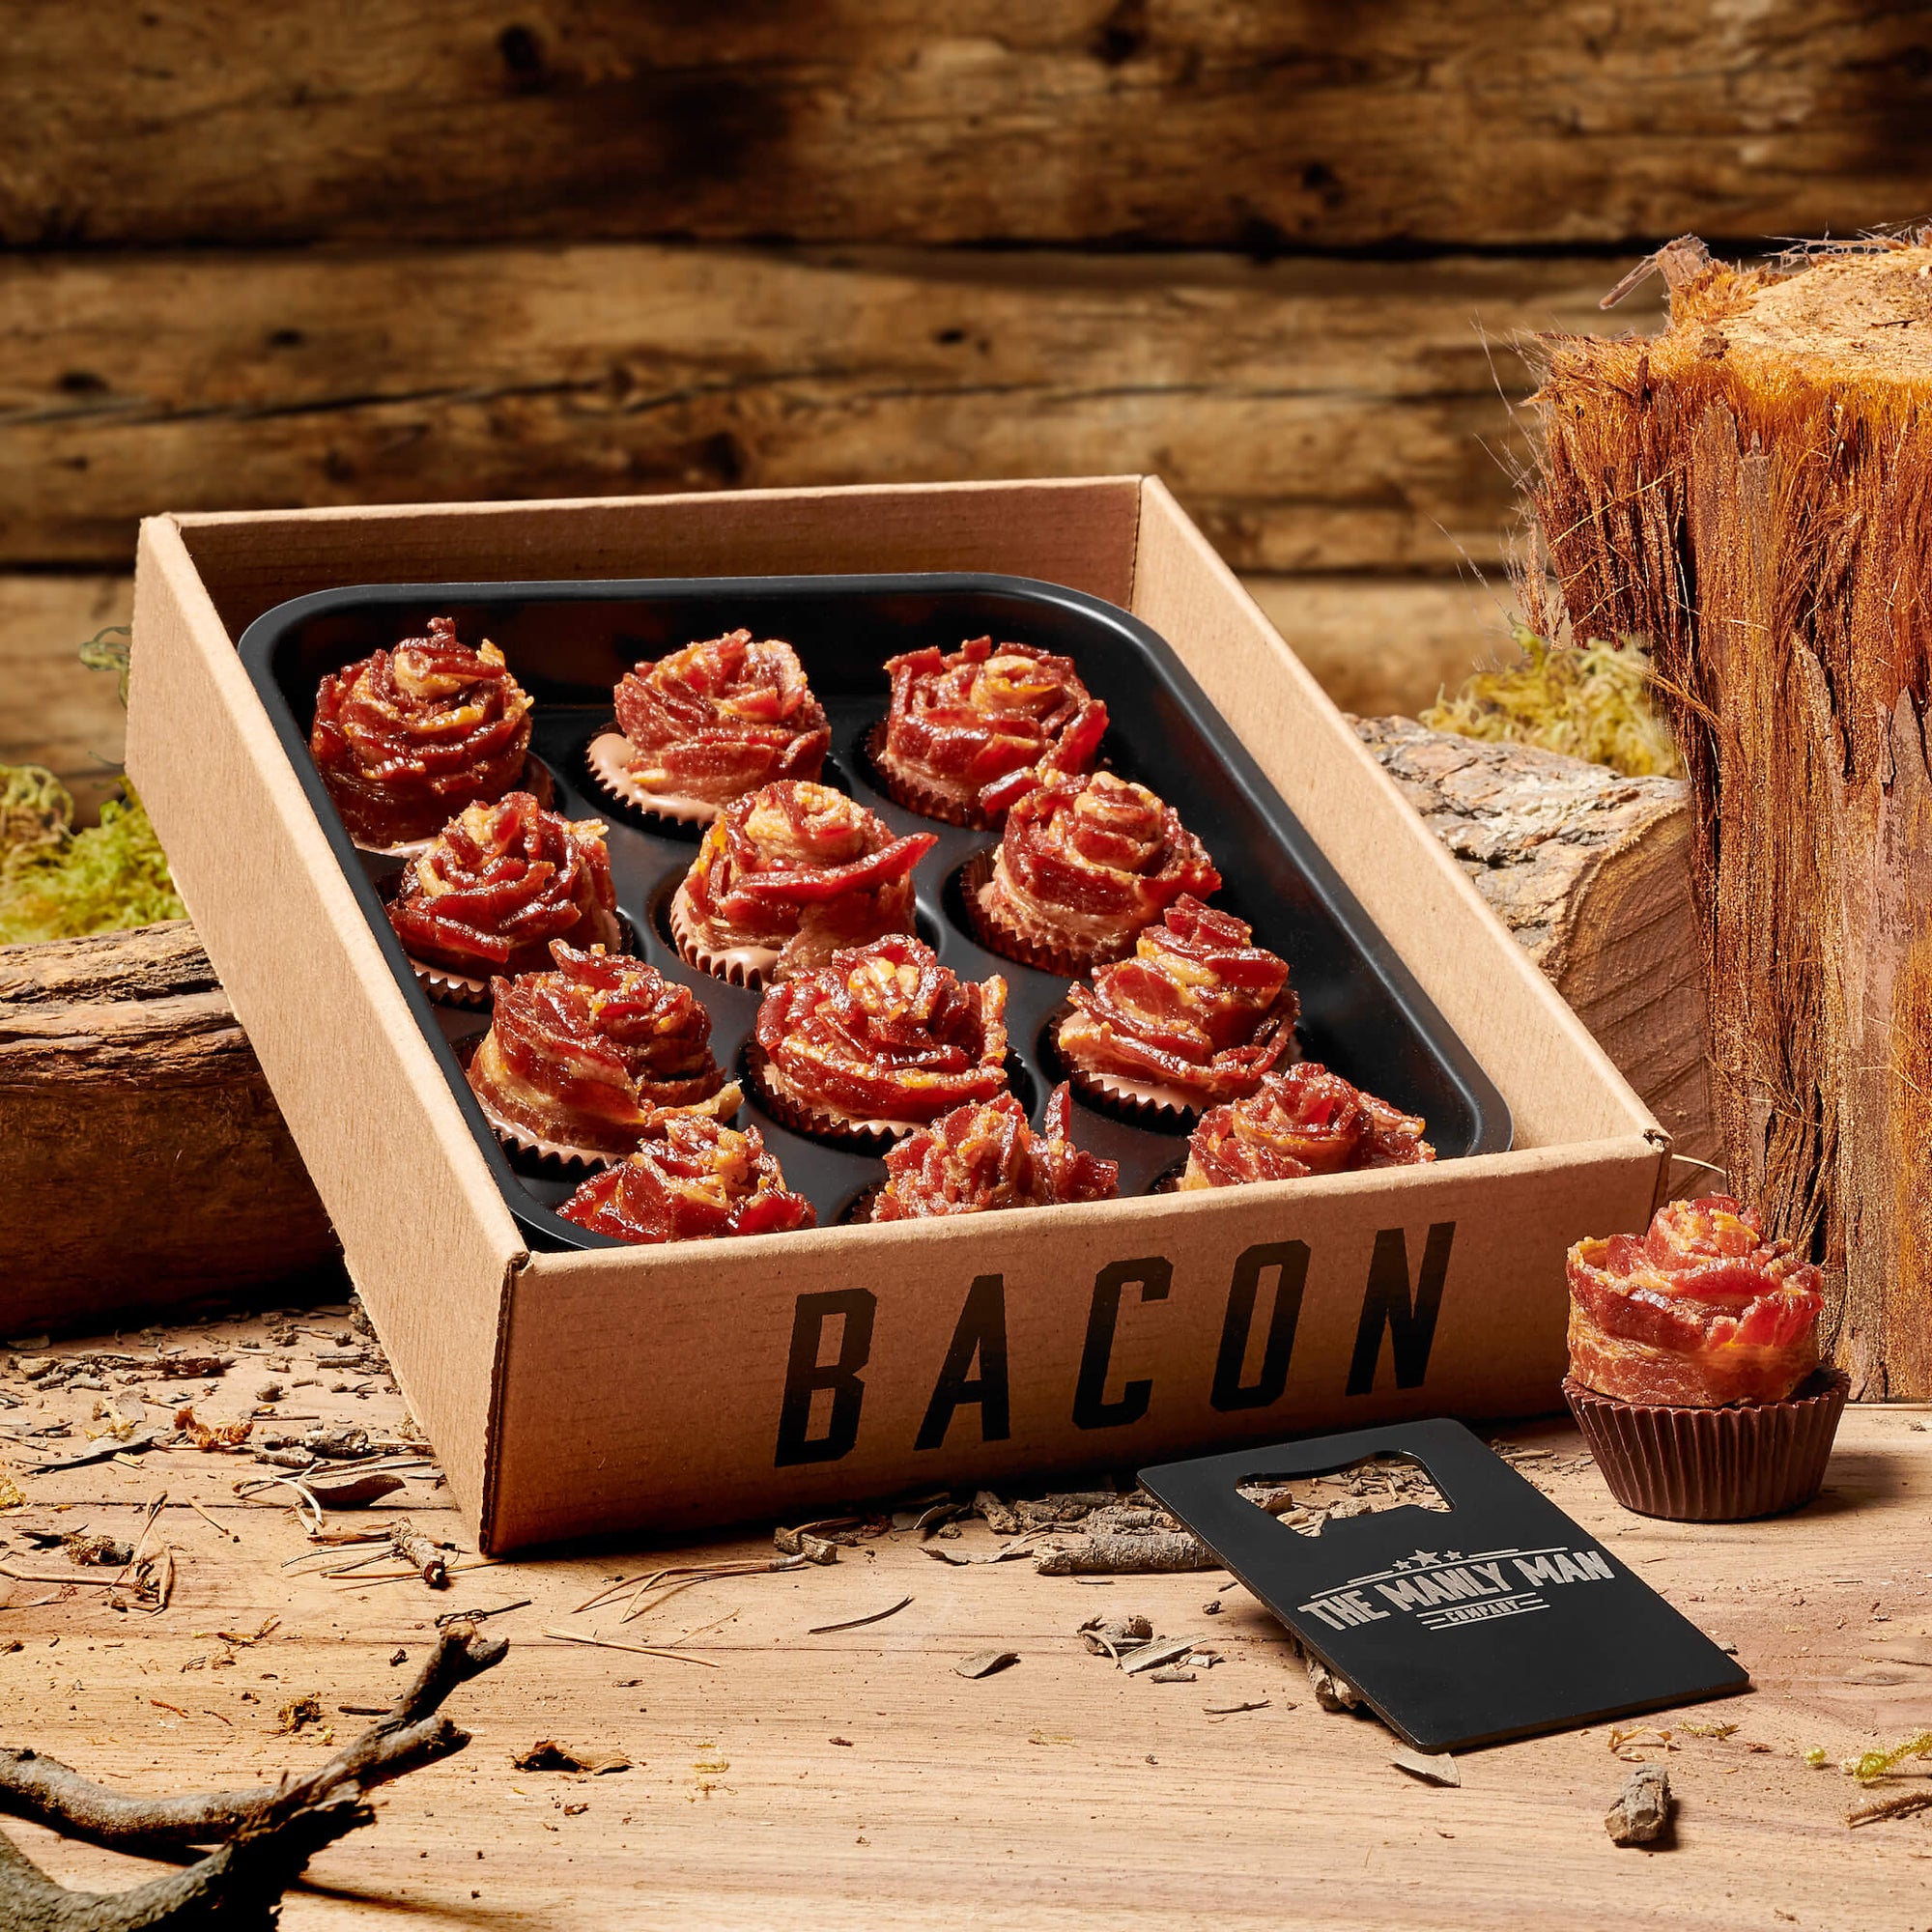 Bacon roses sitting on top of wood and surrounded by wood shavings